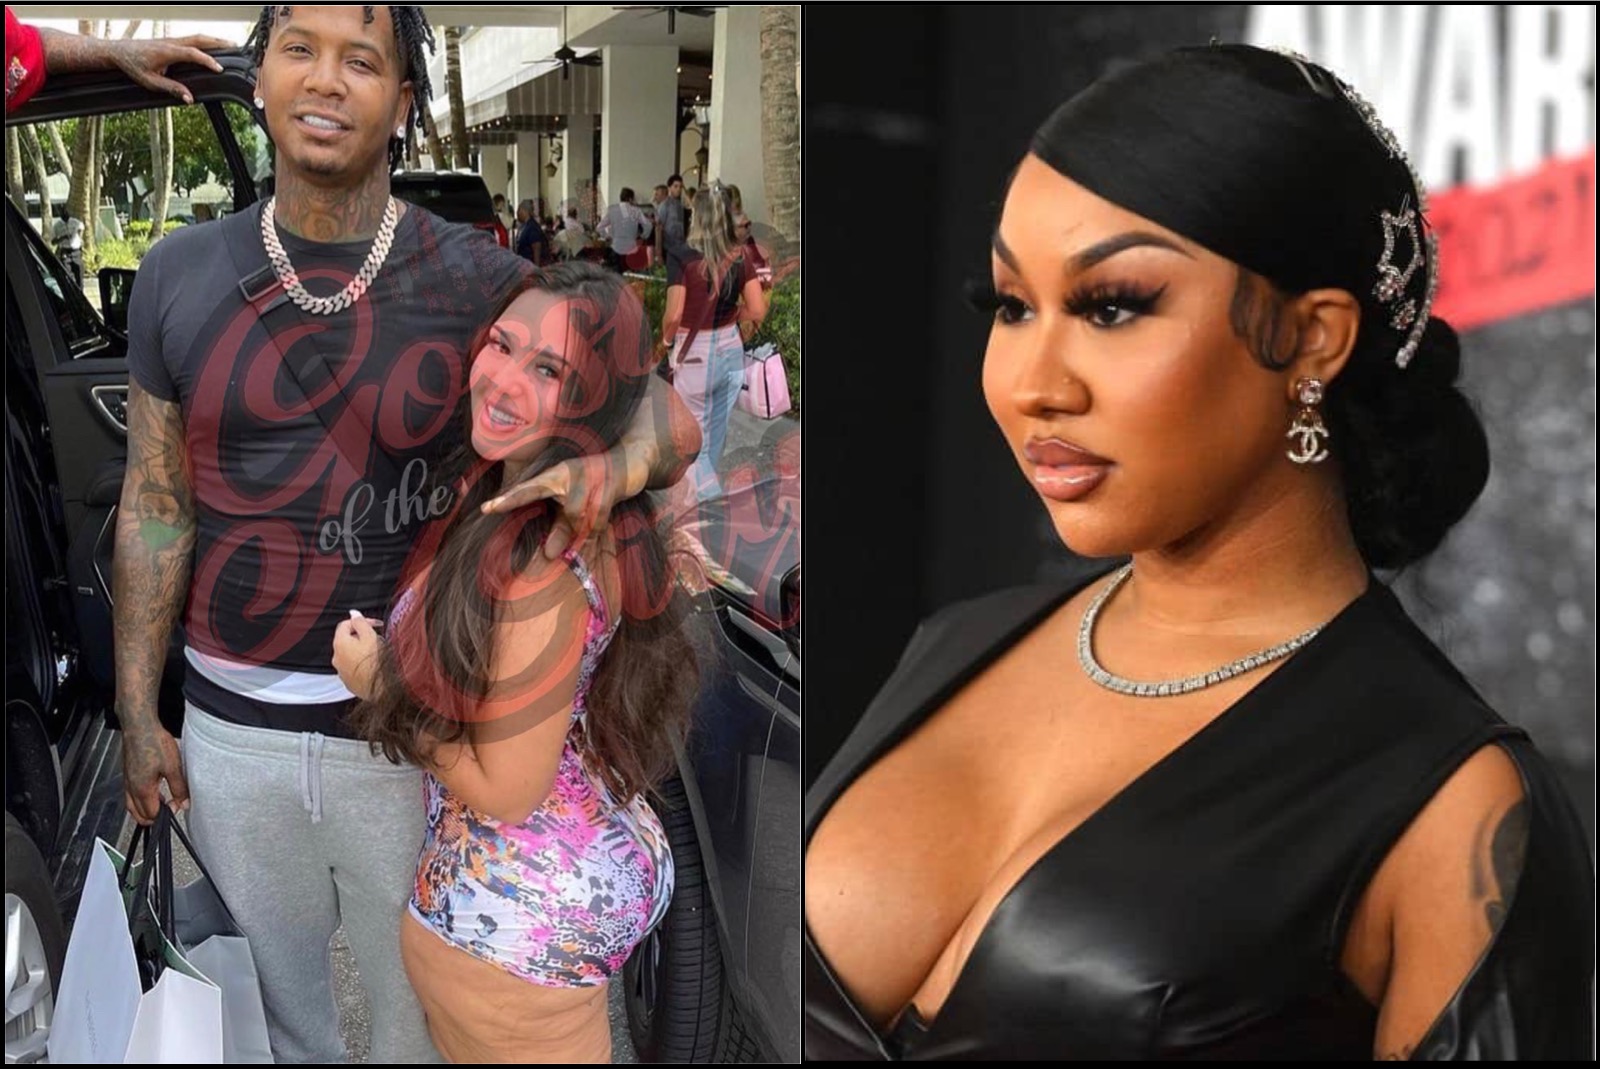 Latina Model Drops Bombshell About Having Relations With Moneybagg Yo